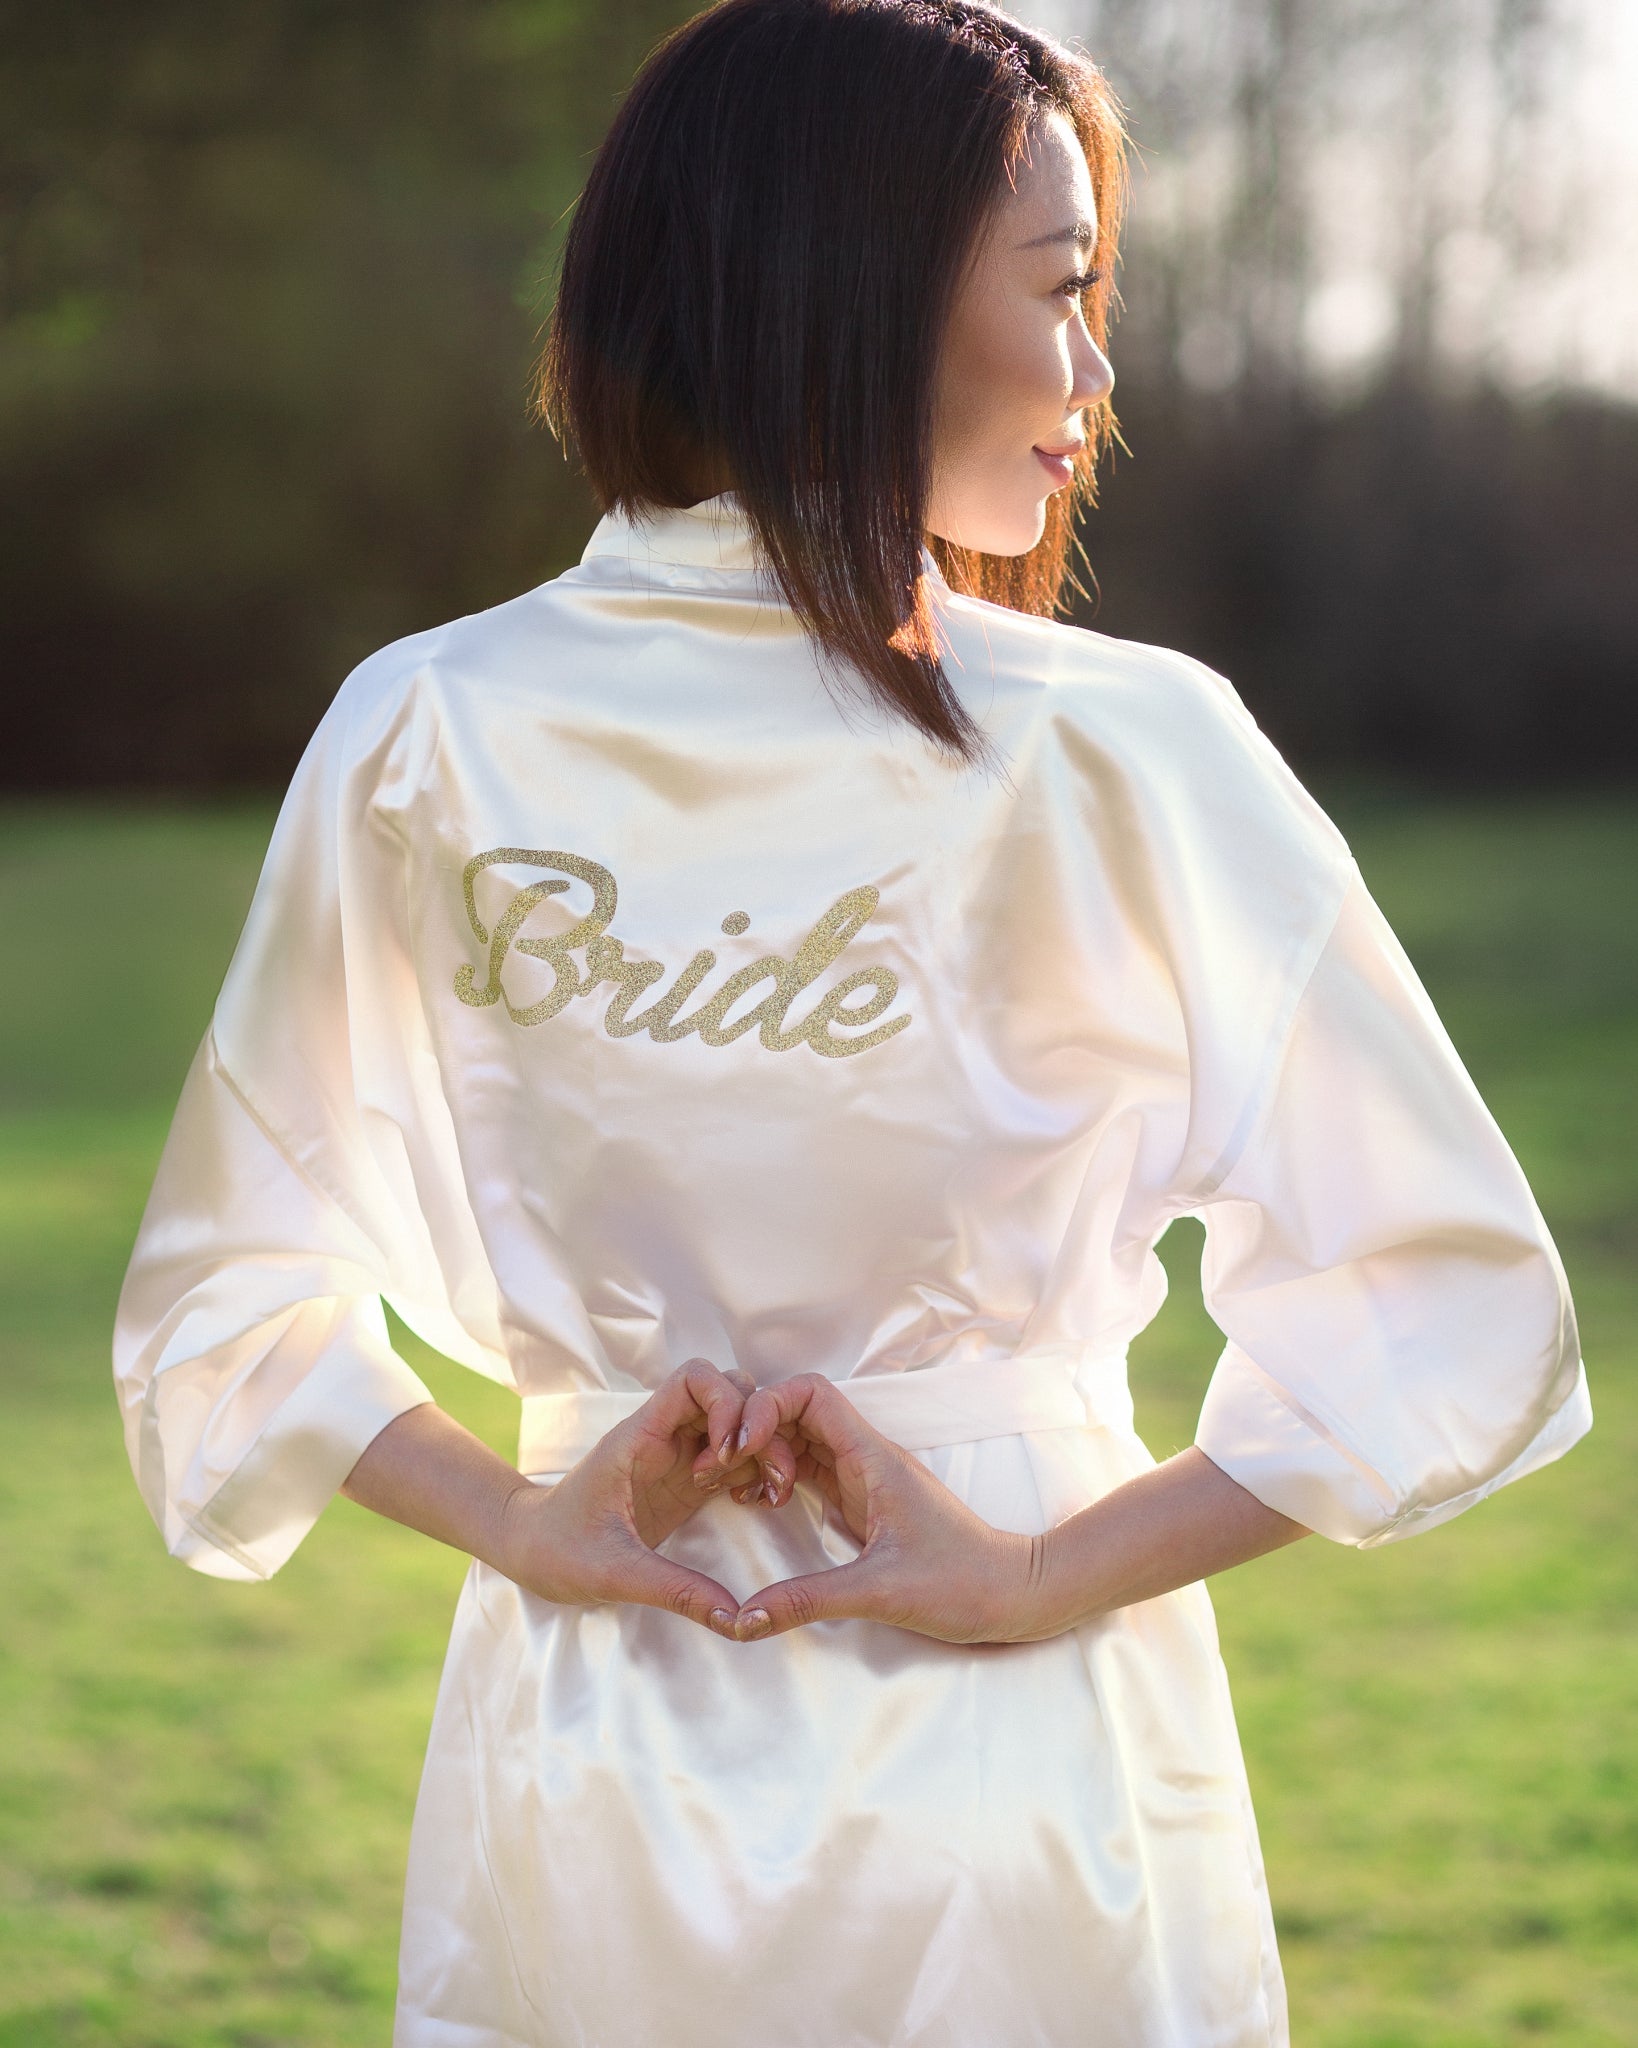 Women's bride bridal white robe for bridal showers, bachelorette parties, wedding gifts for the bride, Shop T.K.S